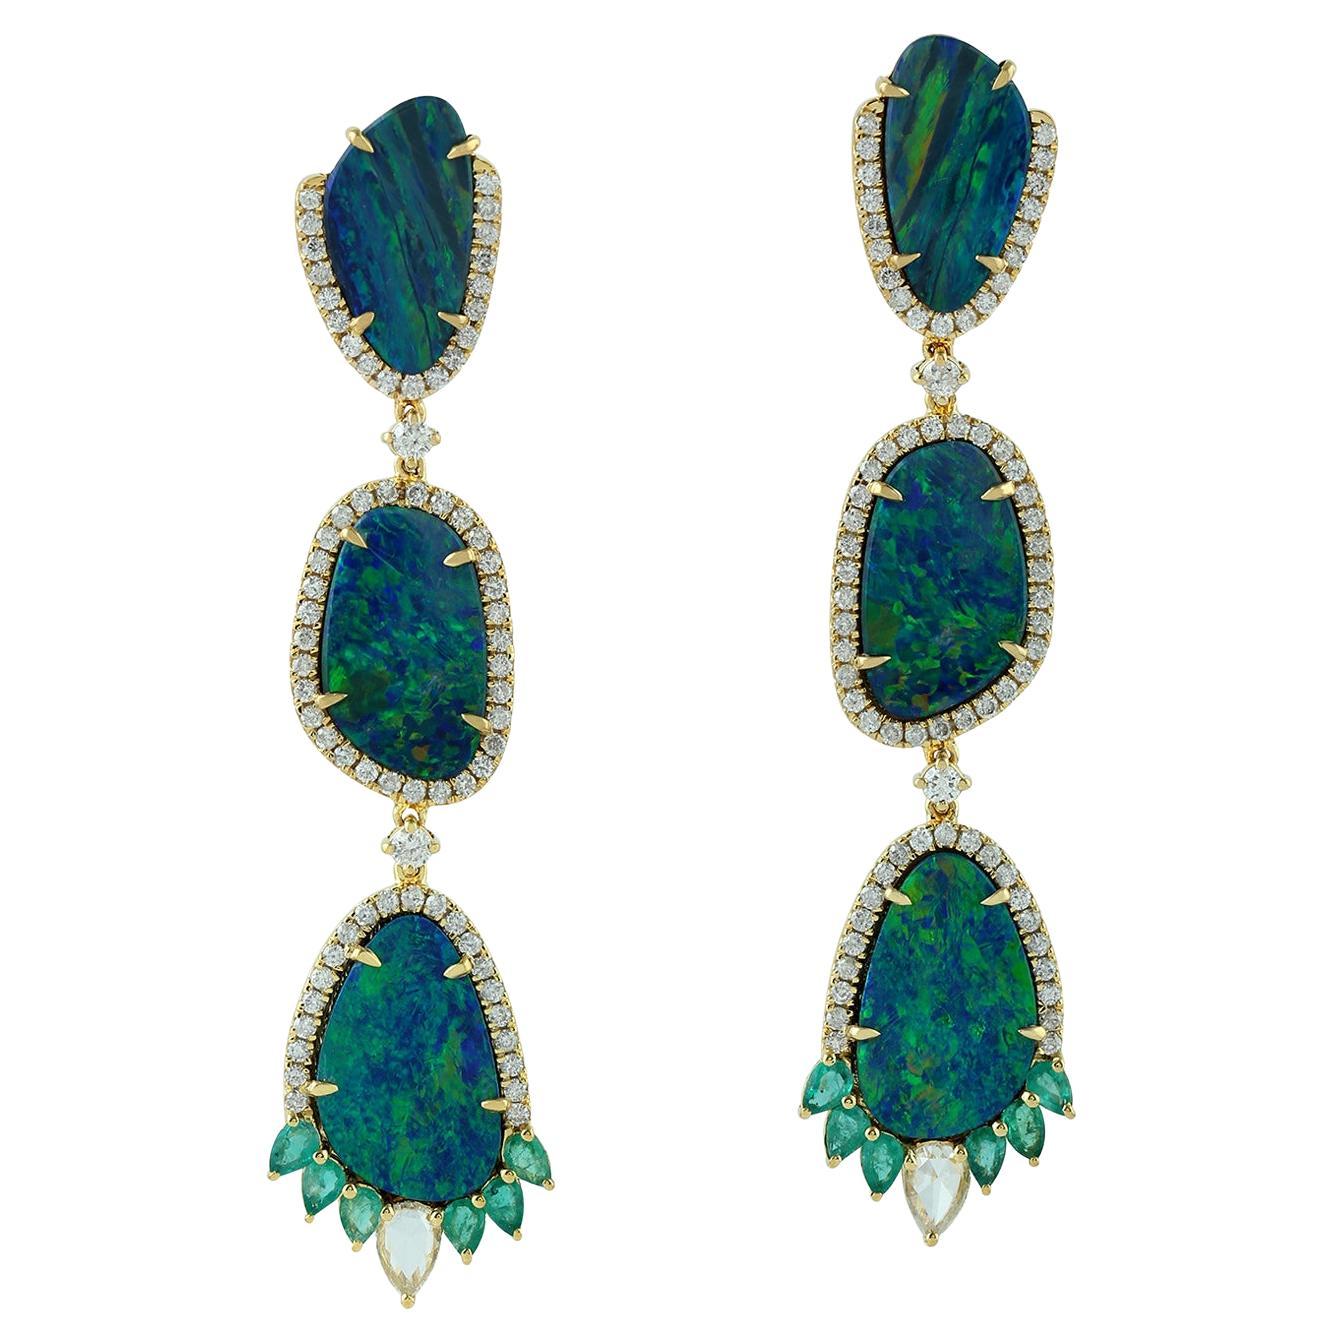 10.79ct 3 Tier Opal Dangle Earrings With Emerald & Diamonds In 18k yellow Gold For Sale